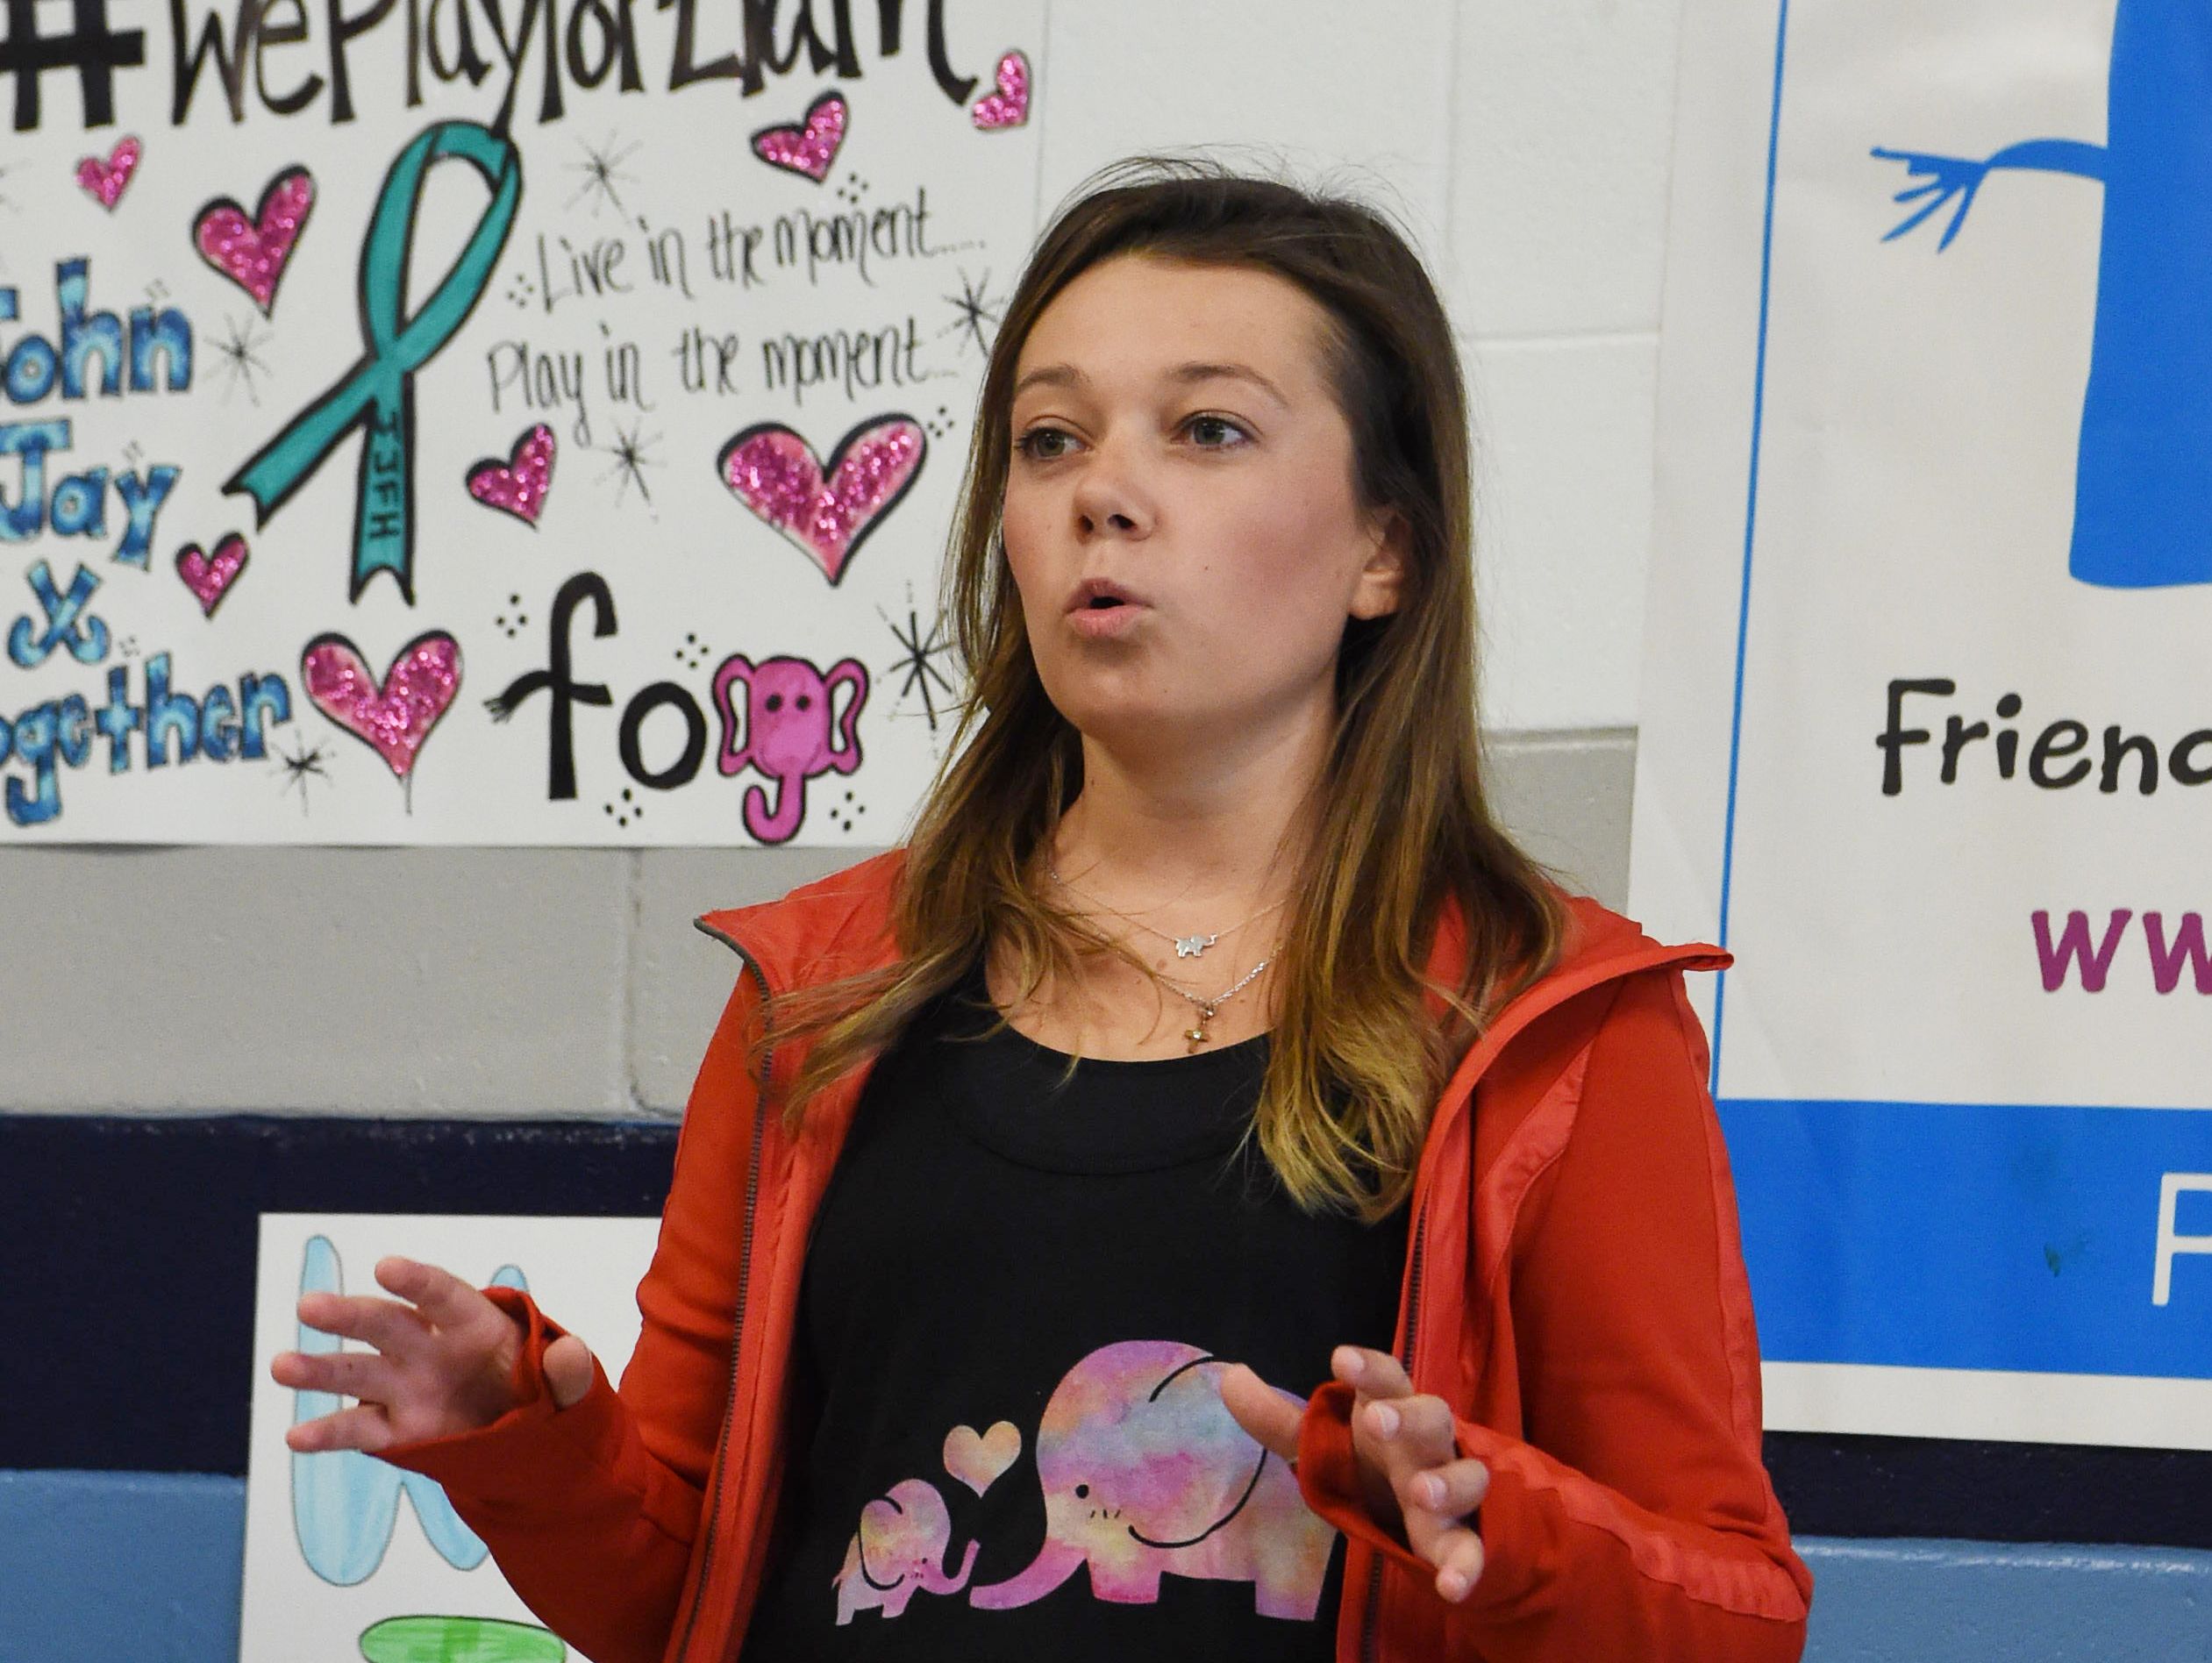 Jaclyn Murphy, 21, the inspiration behind the Friends of Jaclyn Foundation, speaks at John Jay High School before the "adoption" of Liam, 5, by the school's field hockey team.